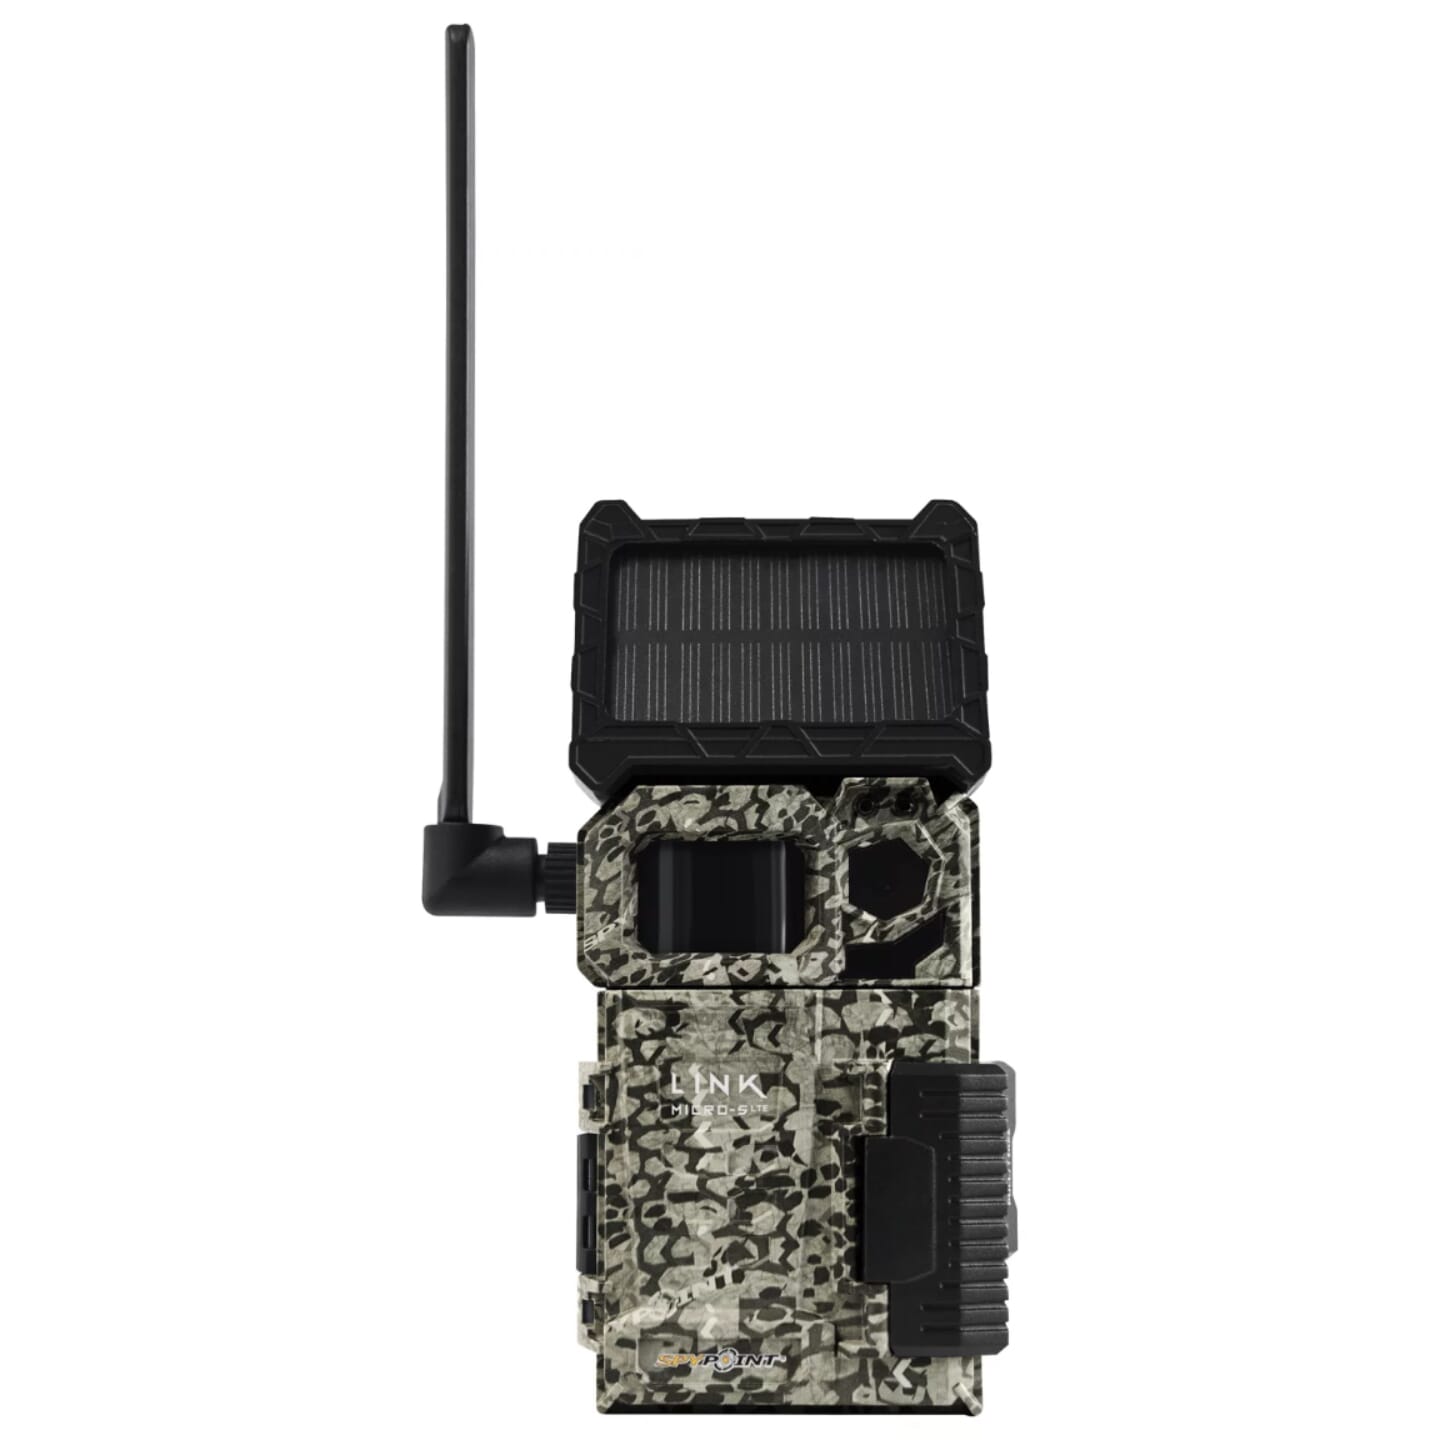 Spypoint Link-Micro-S-LTE Solar Cellular Trail Camera for Verizon Network 01901